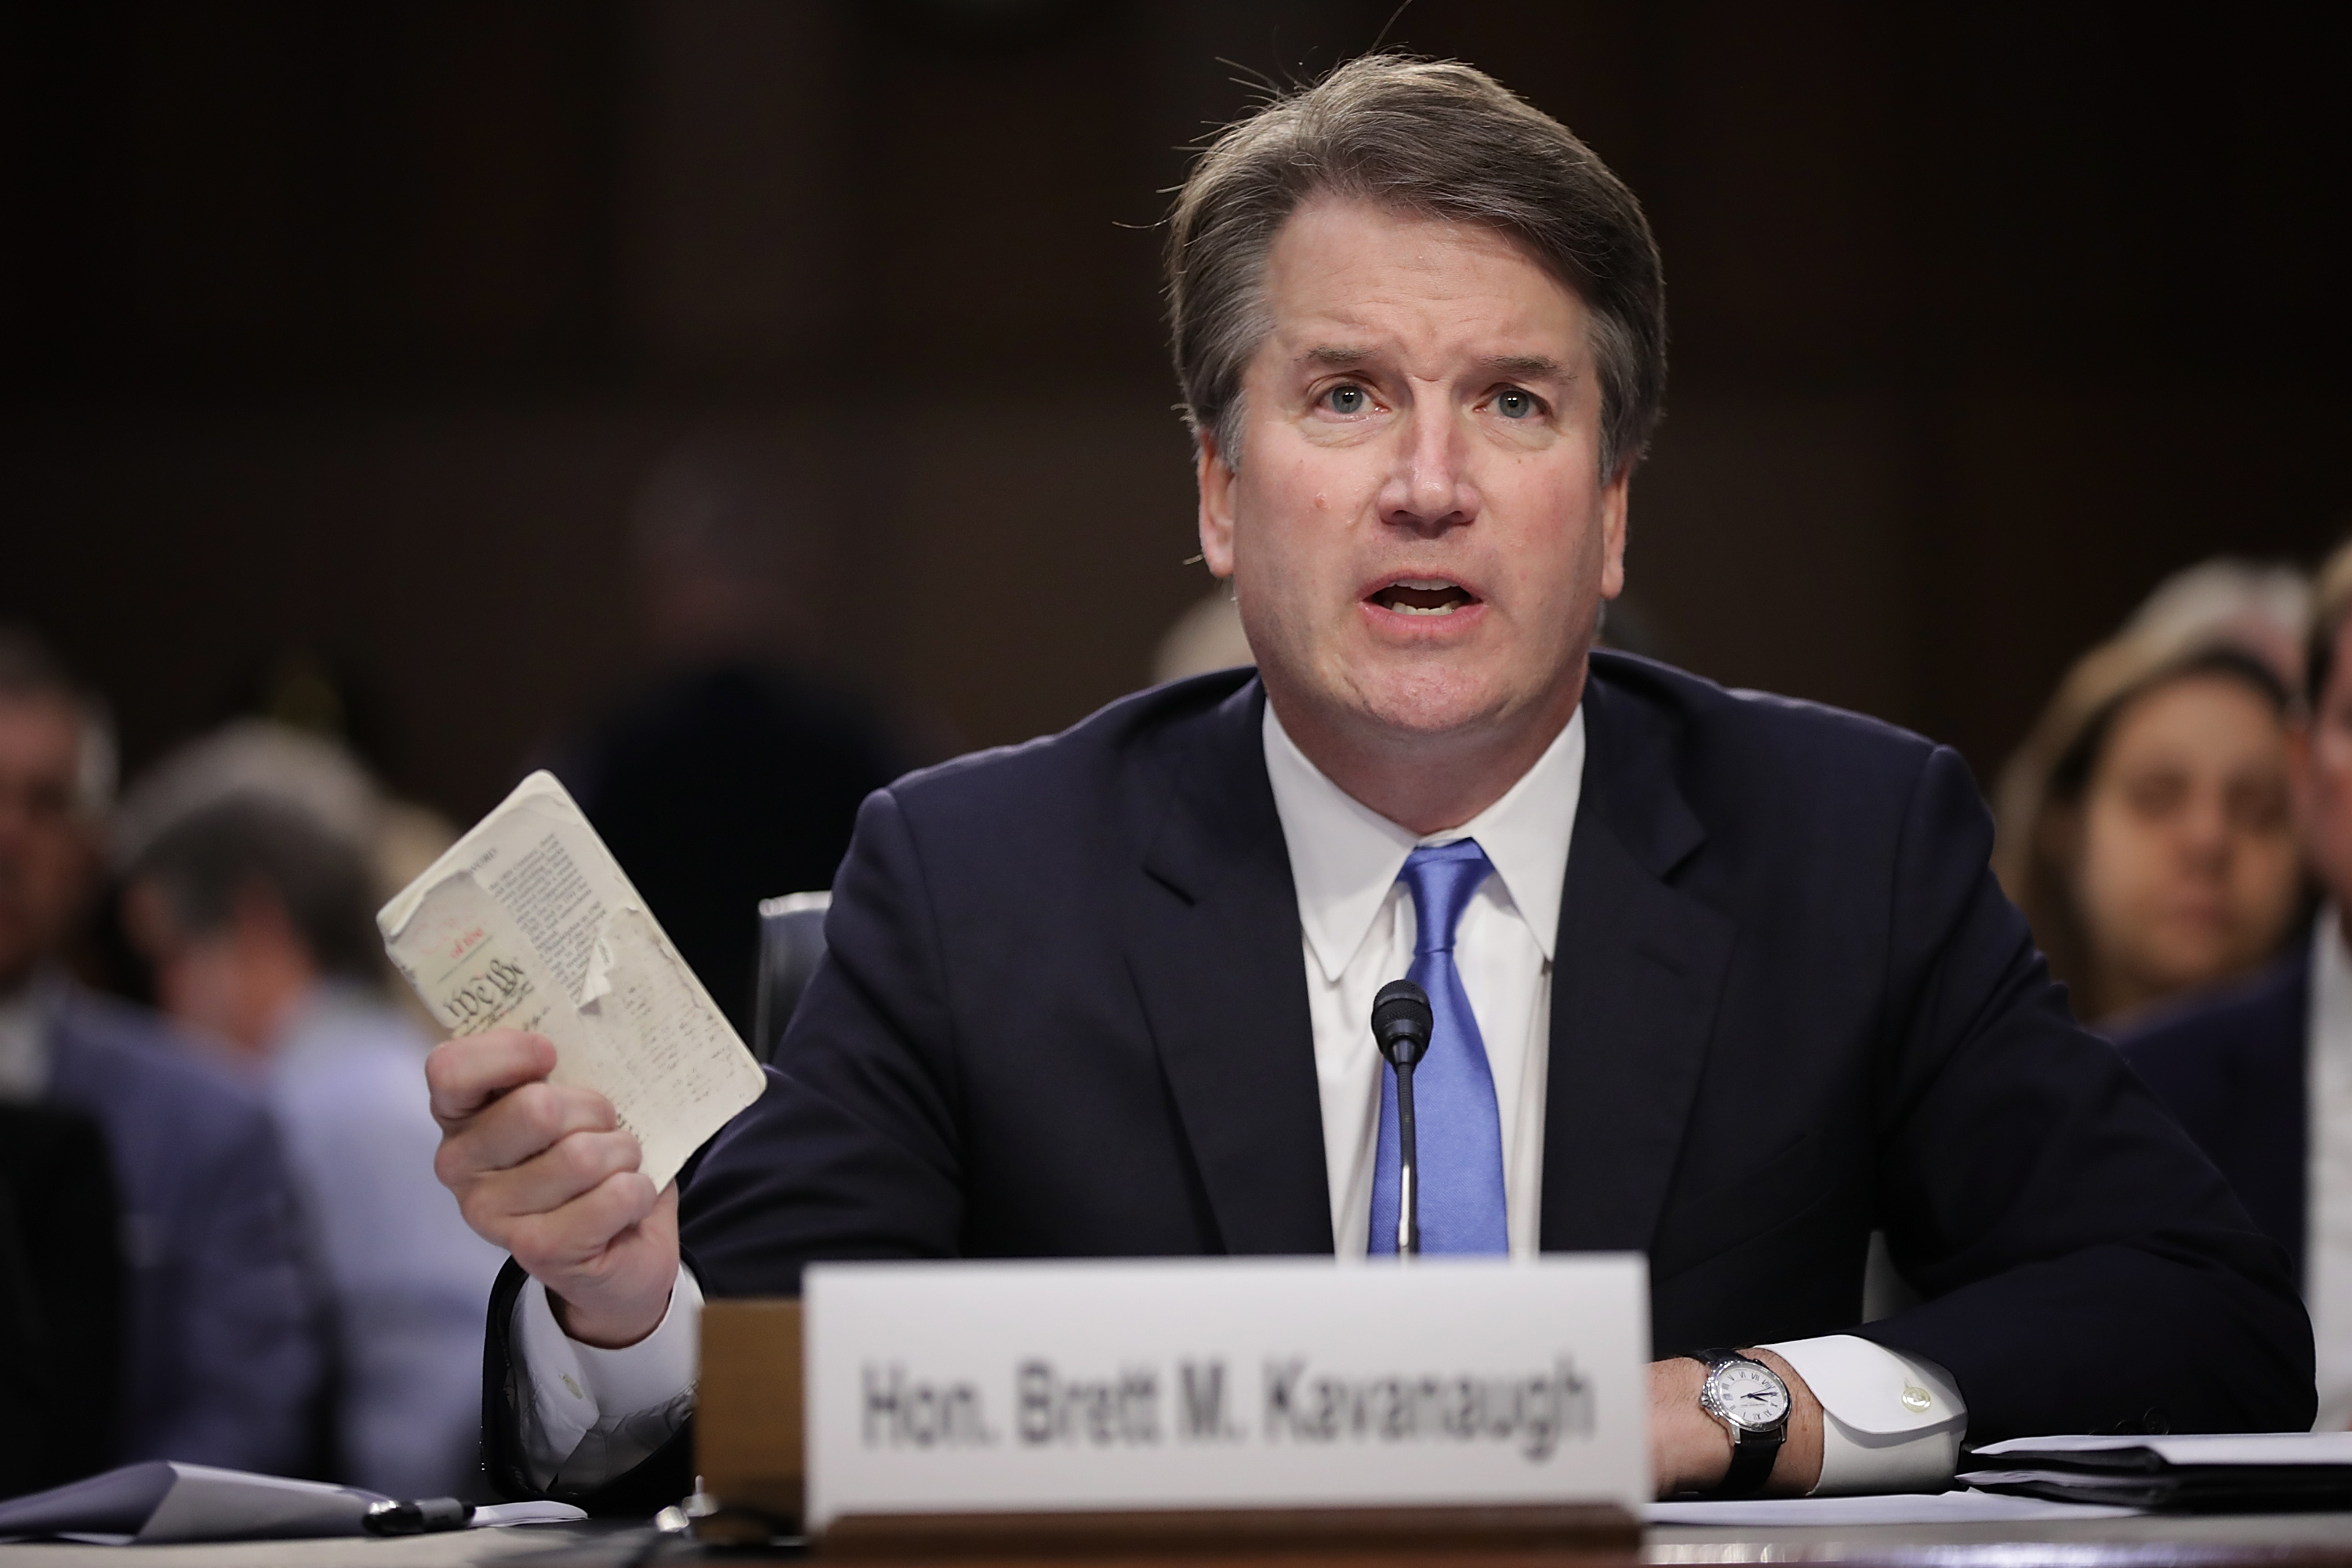 Supreme Court nominee Judge Brett Kavanaugh holds up a small copy of the U.S. Constitution while answering questions before the Senate Judiciary Committee during the second day of his Supreme Court confirmation hearing on Capitol Hill September 5, 2018 in Washington, D.C. (Chip Somodevilla—Getty Images)